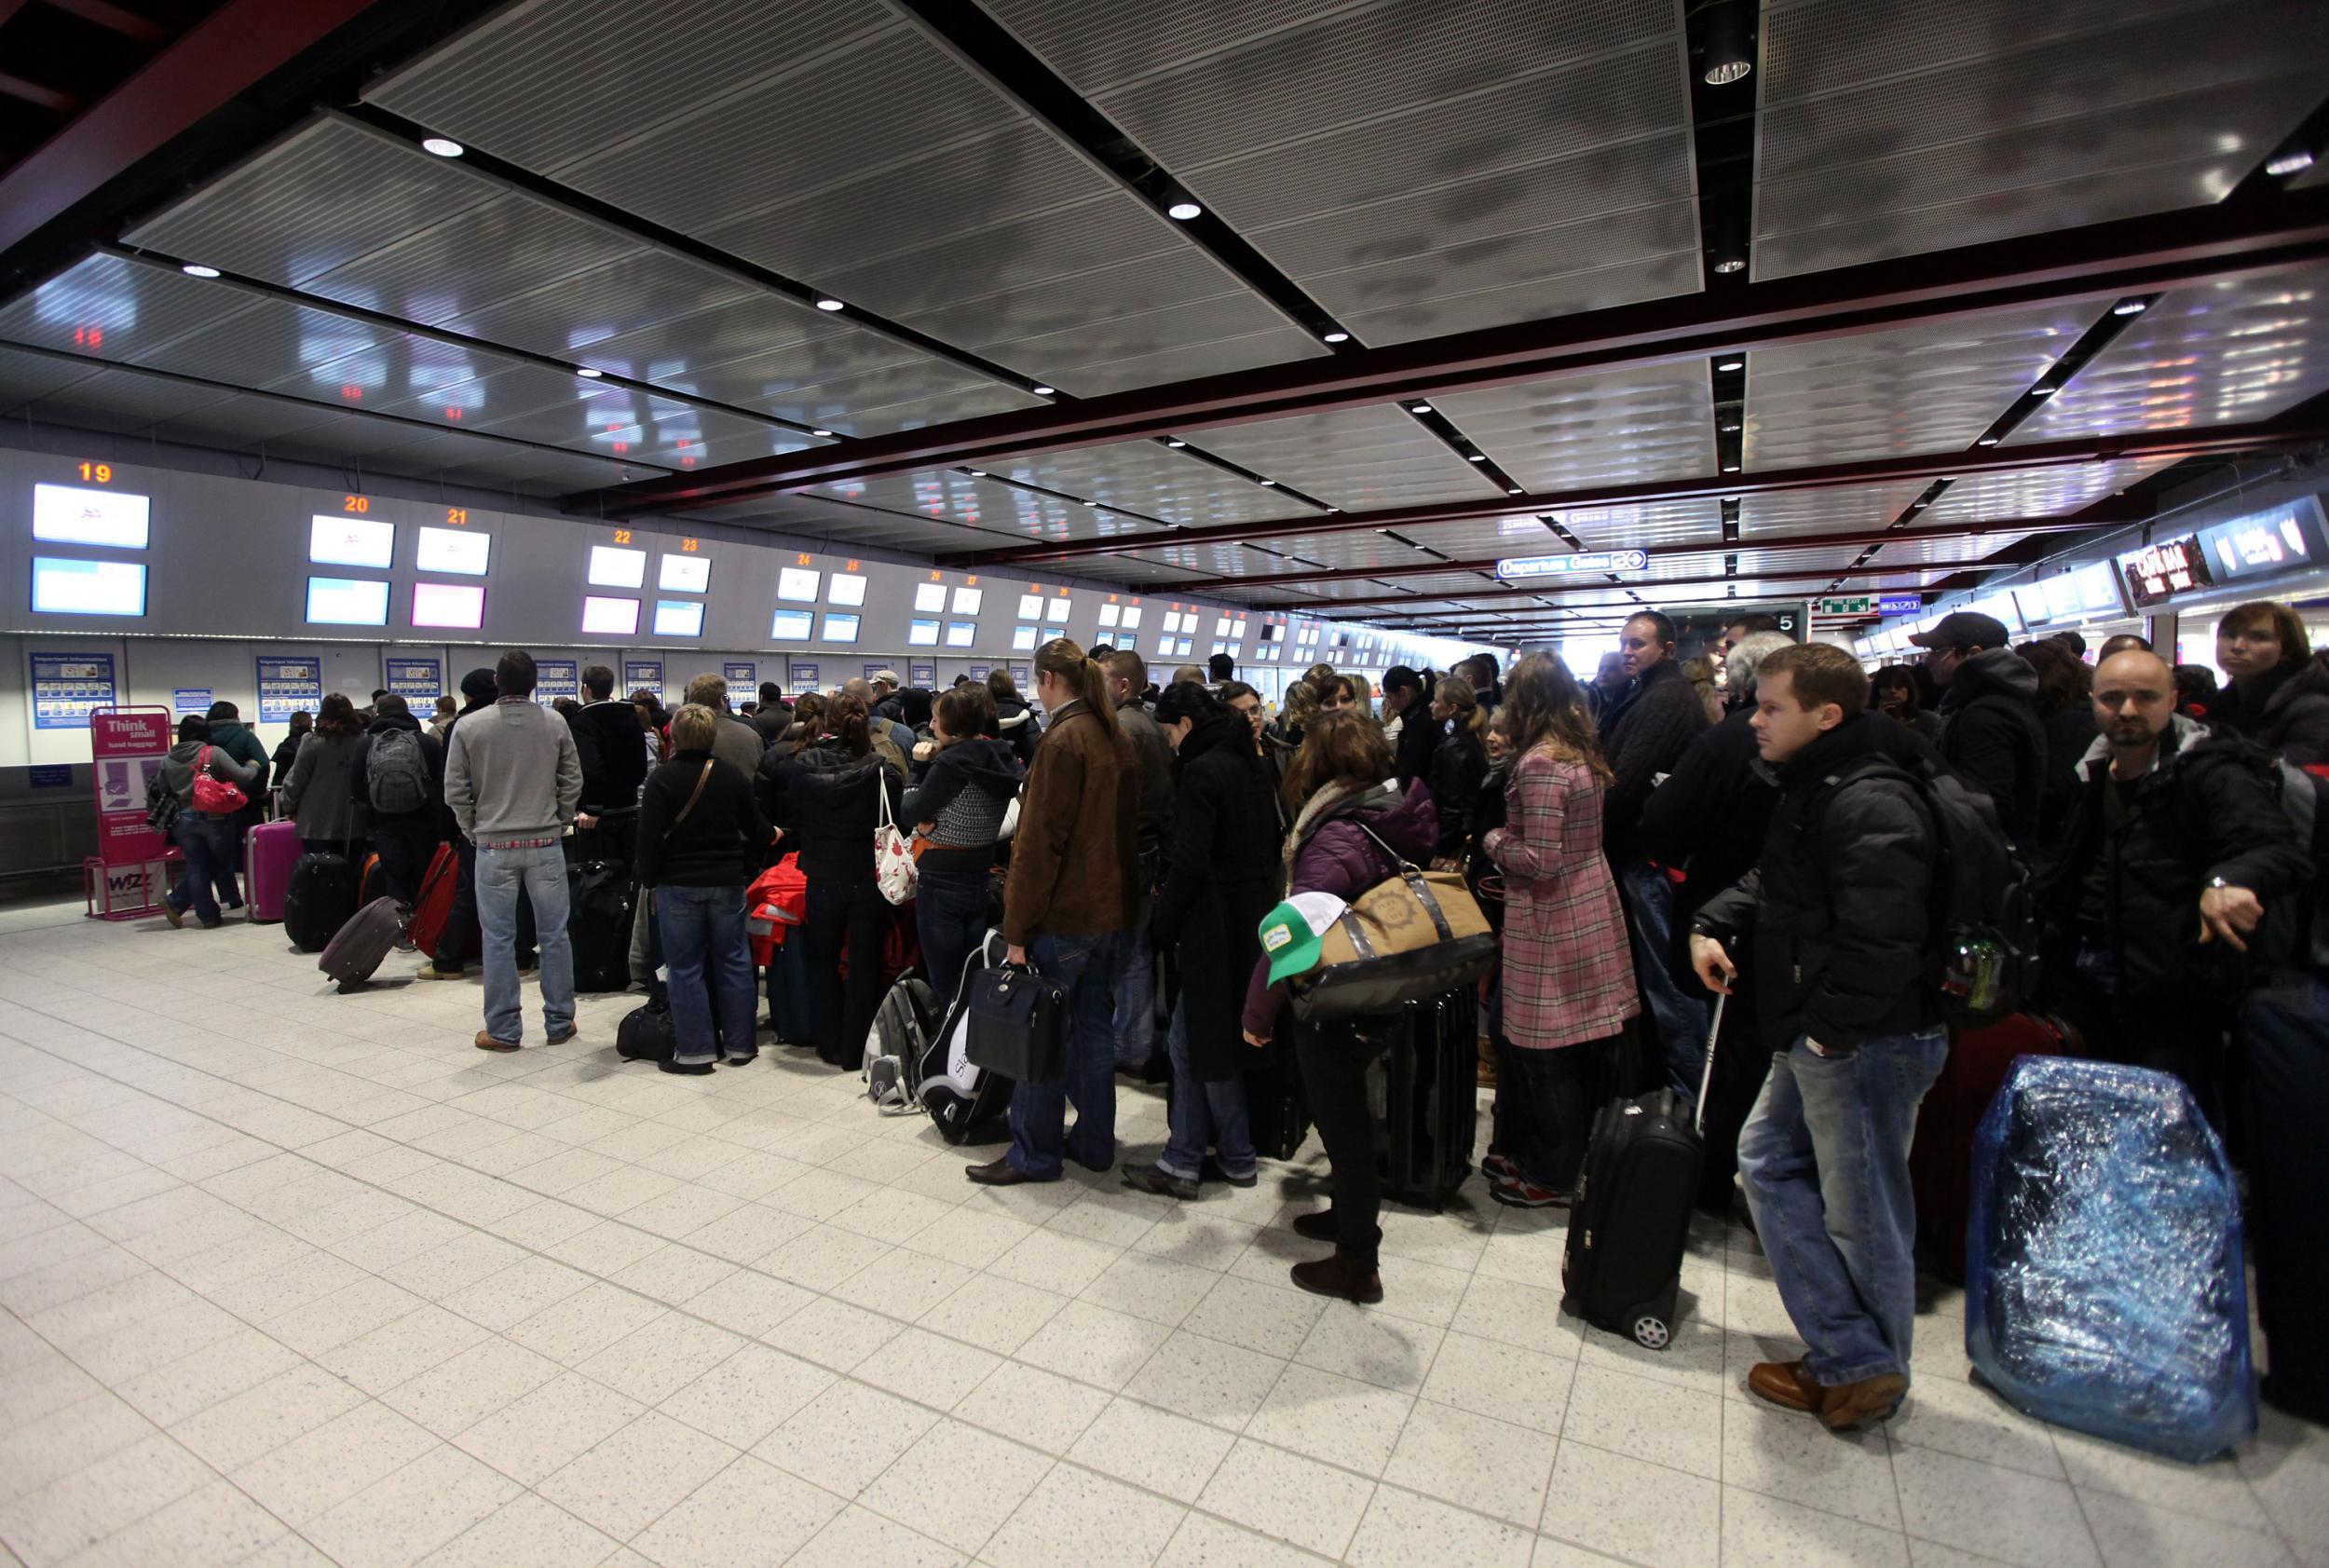 Friday will be the busiest day for airports including Luton